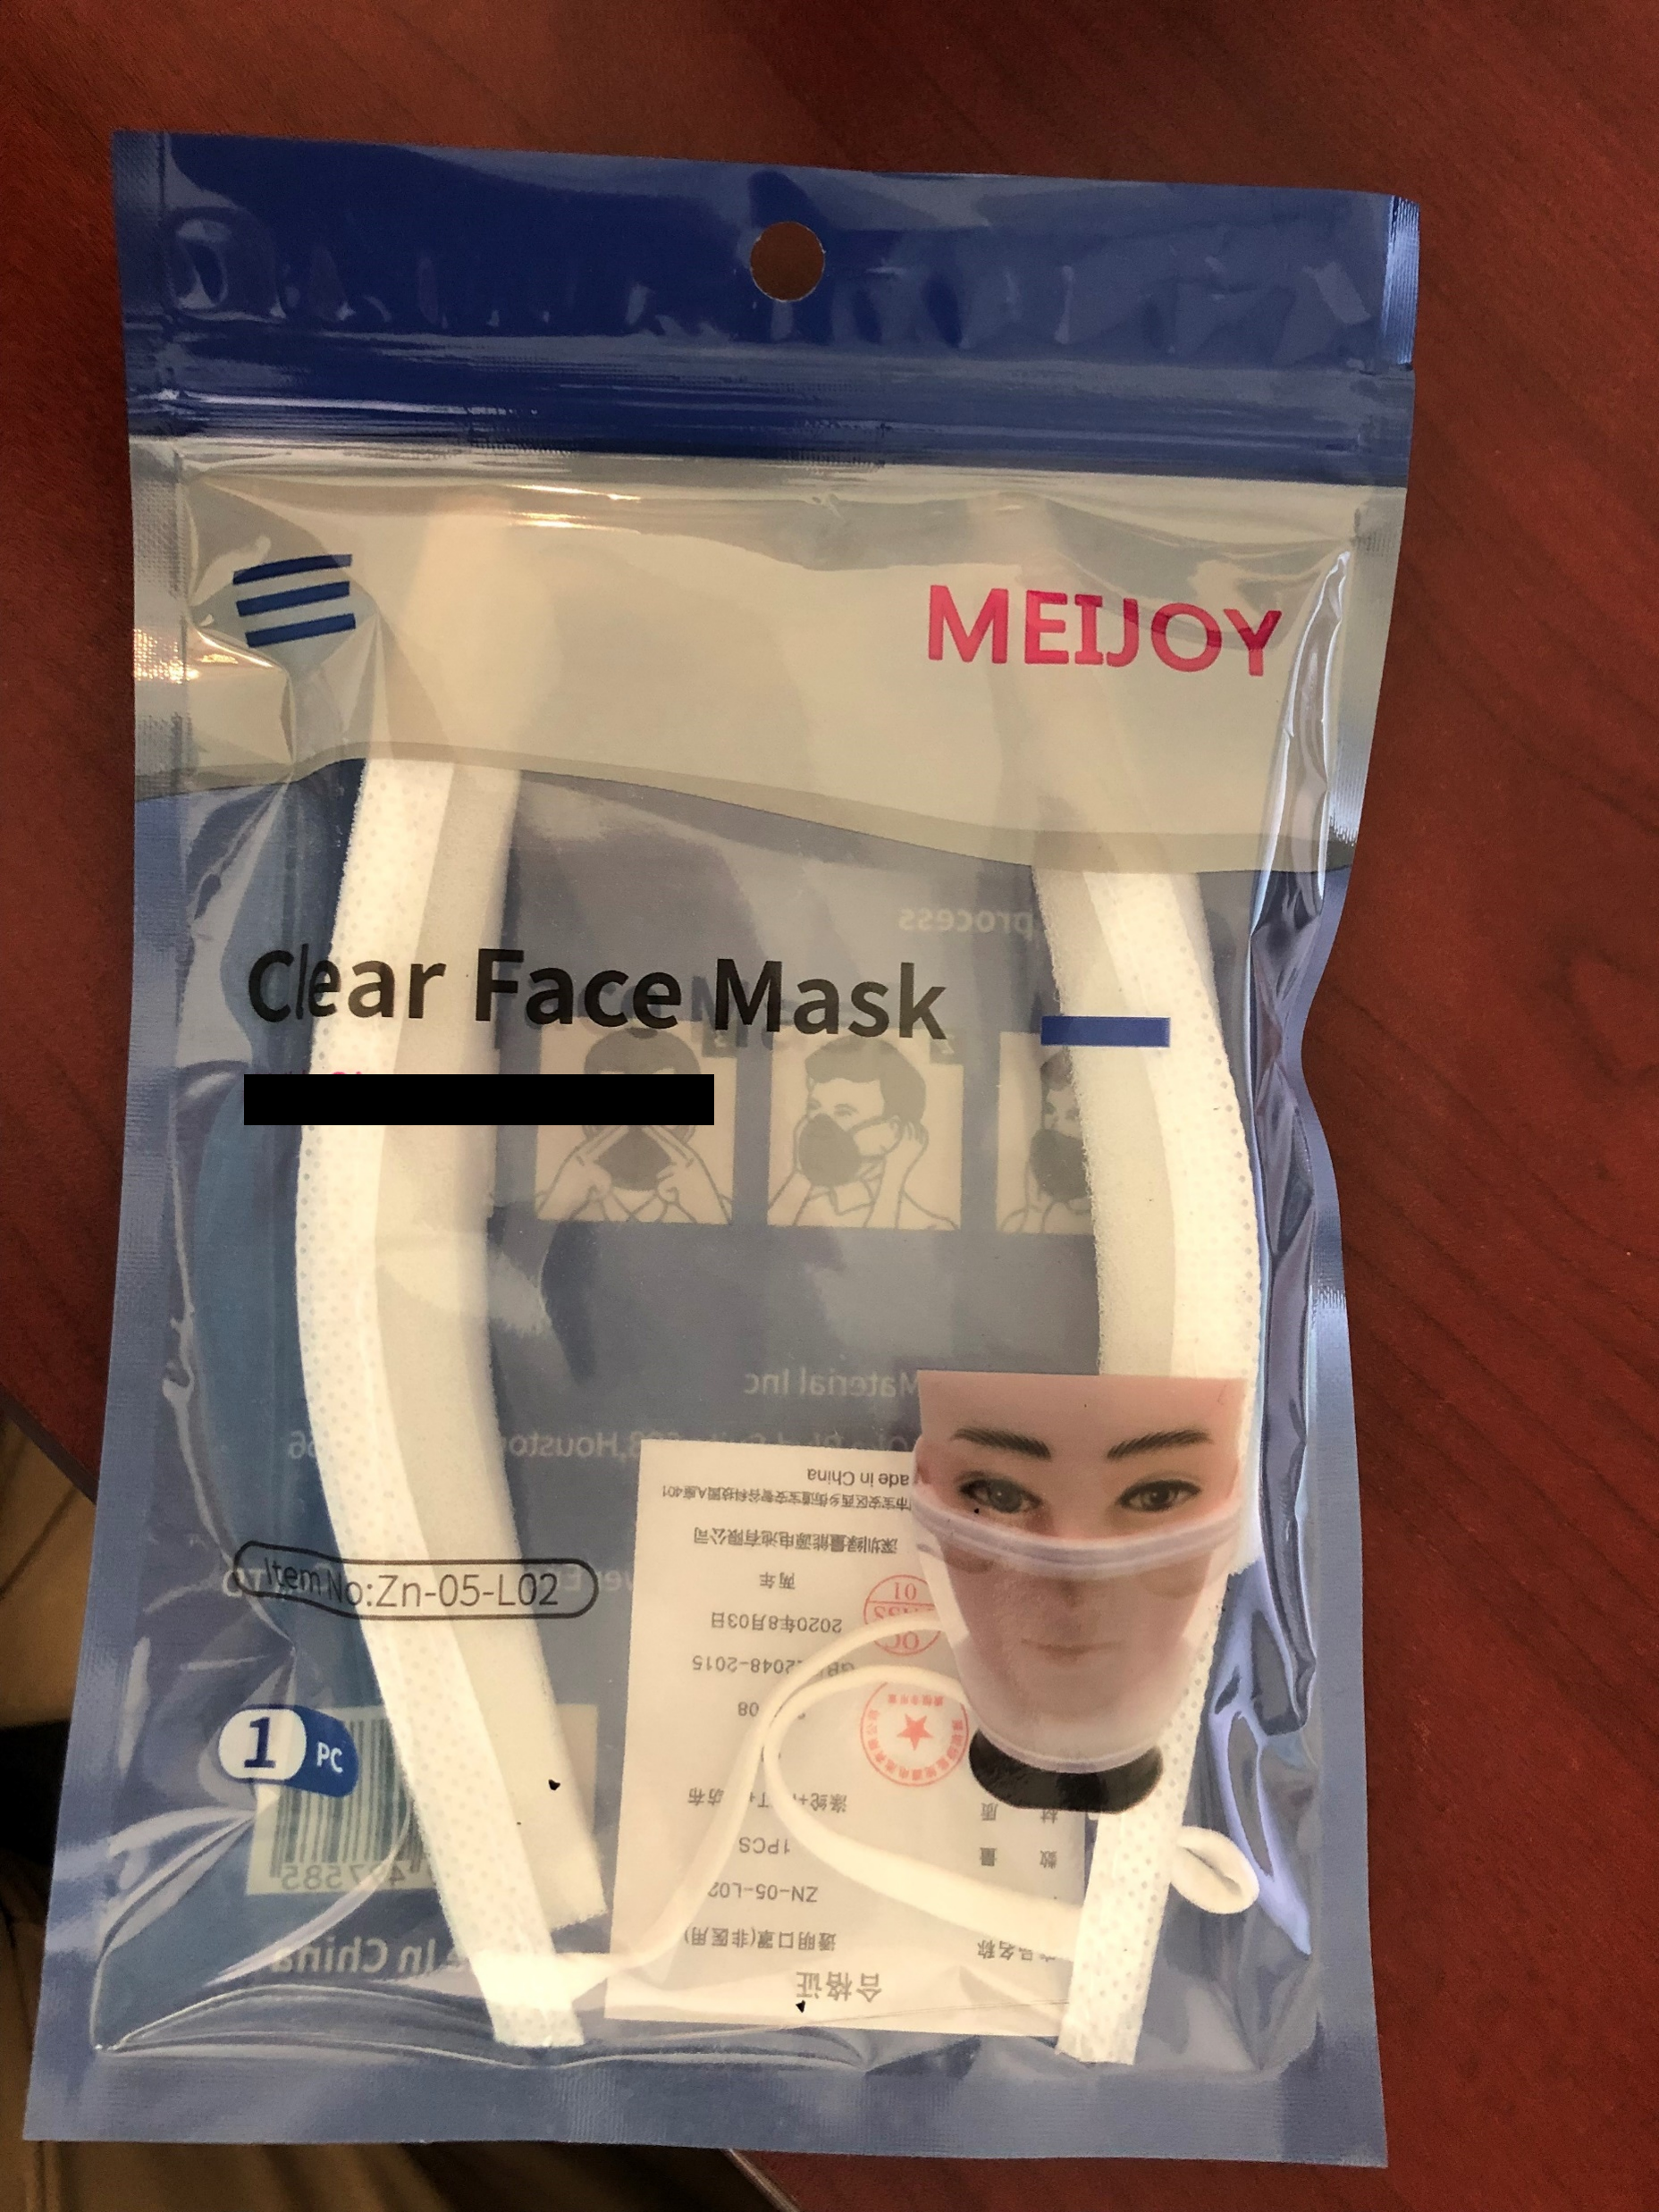 Clear mask